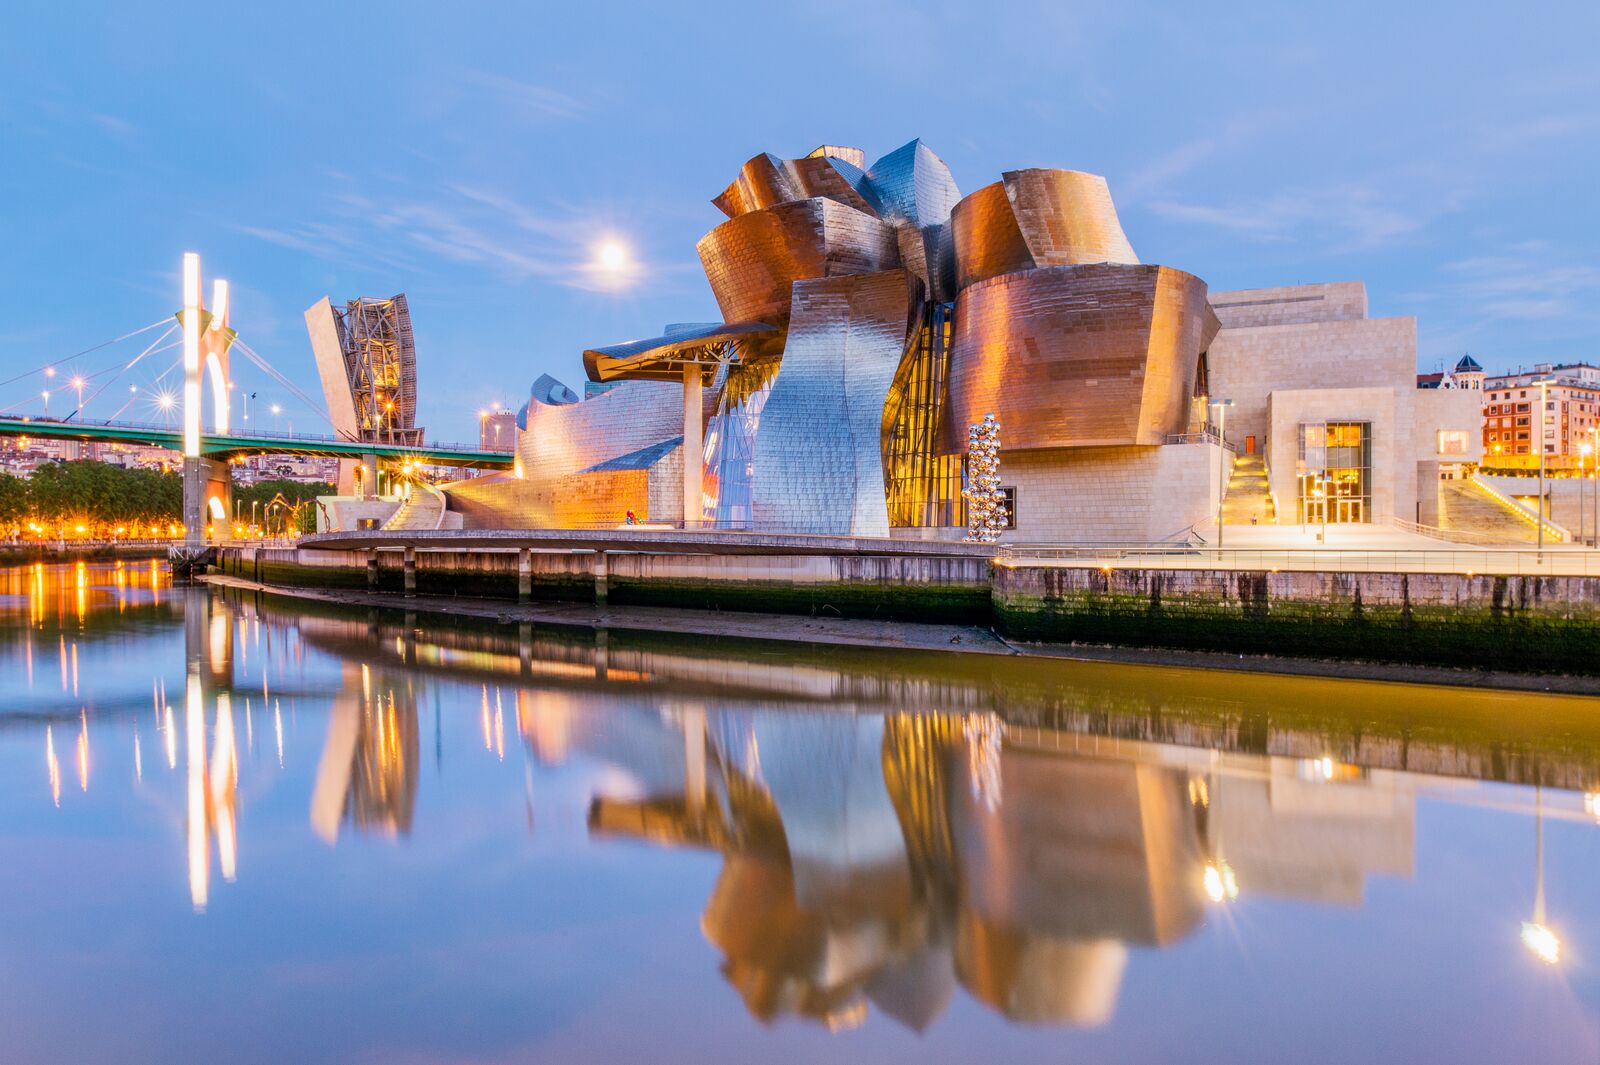 BILBAO, SPAIN - June 19, 2016: Guggenheim Museum on June 19, 2016 in Bilbao, Spain. This and futuristic museum was designed by Frank Gehry.